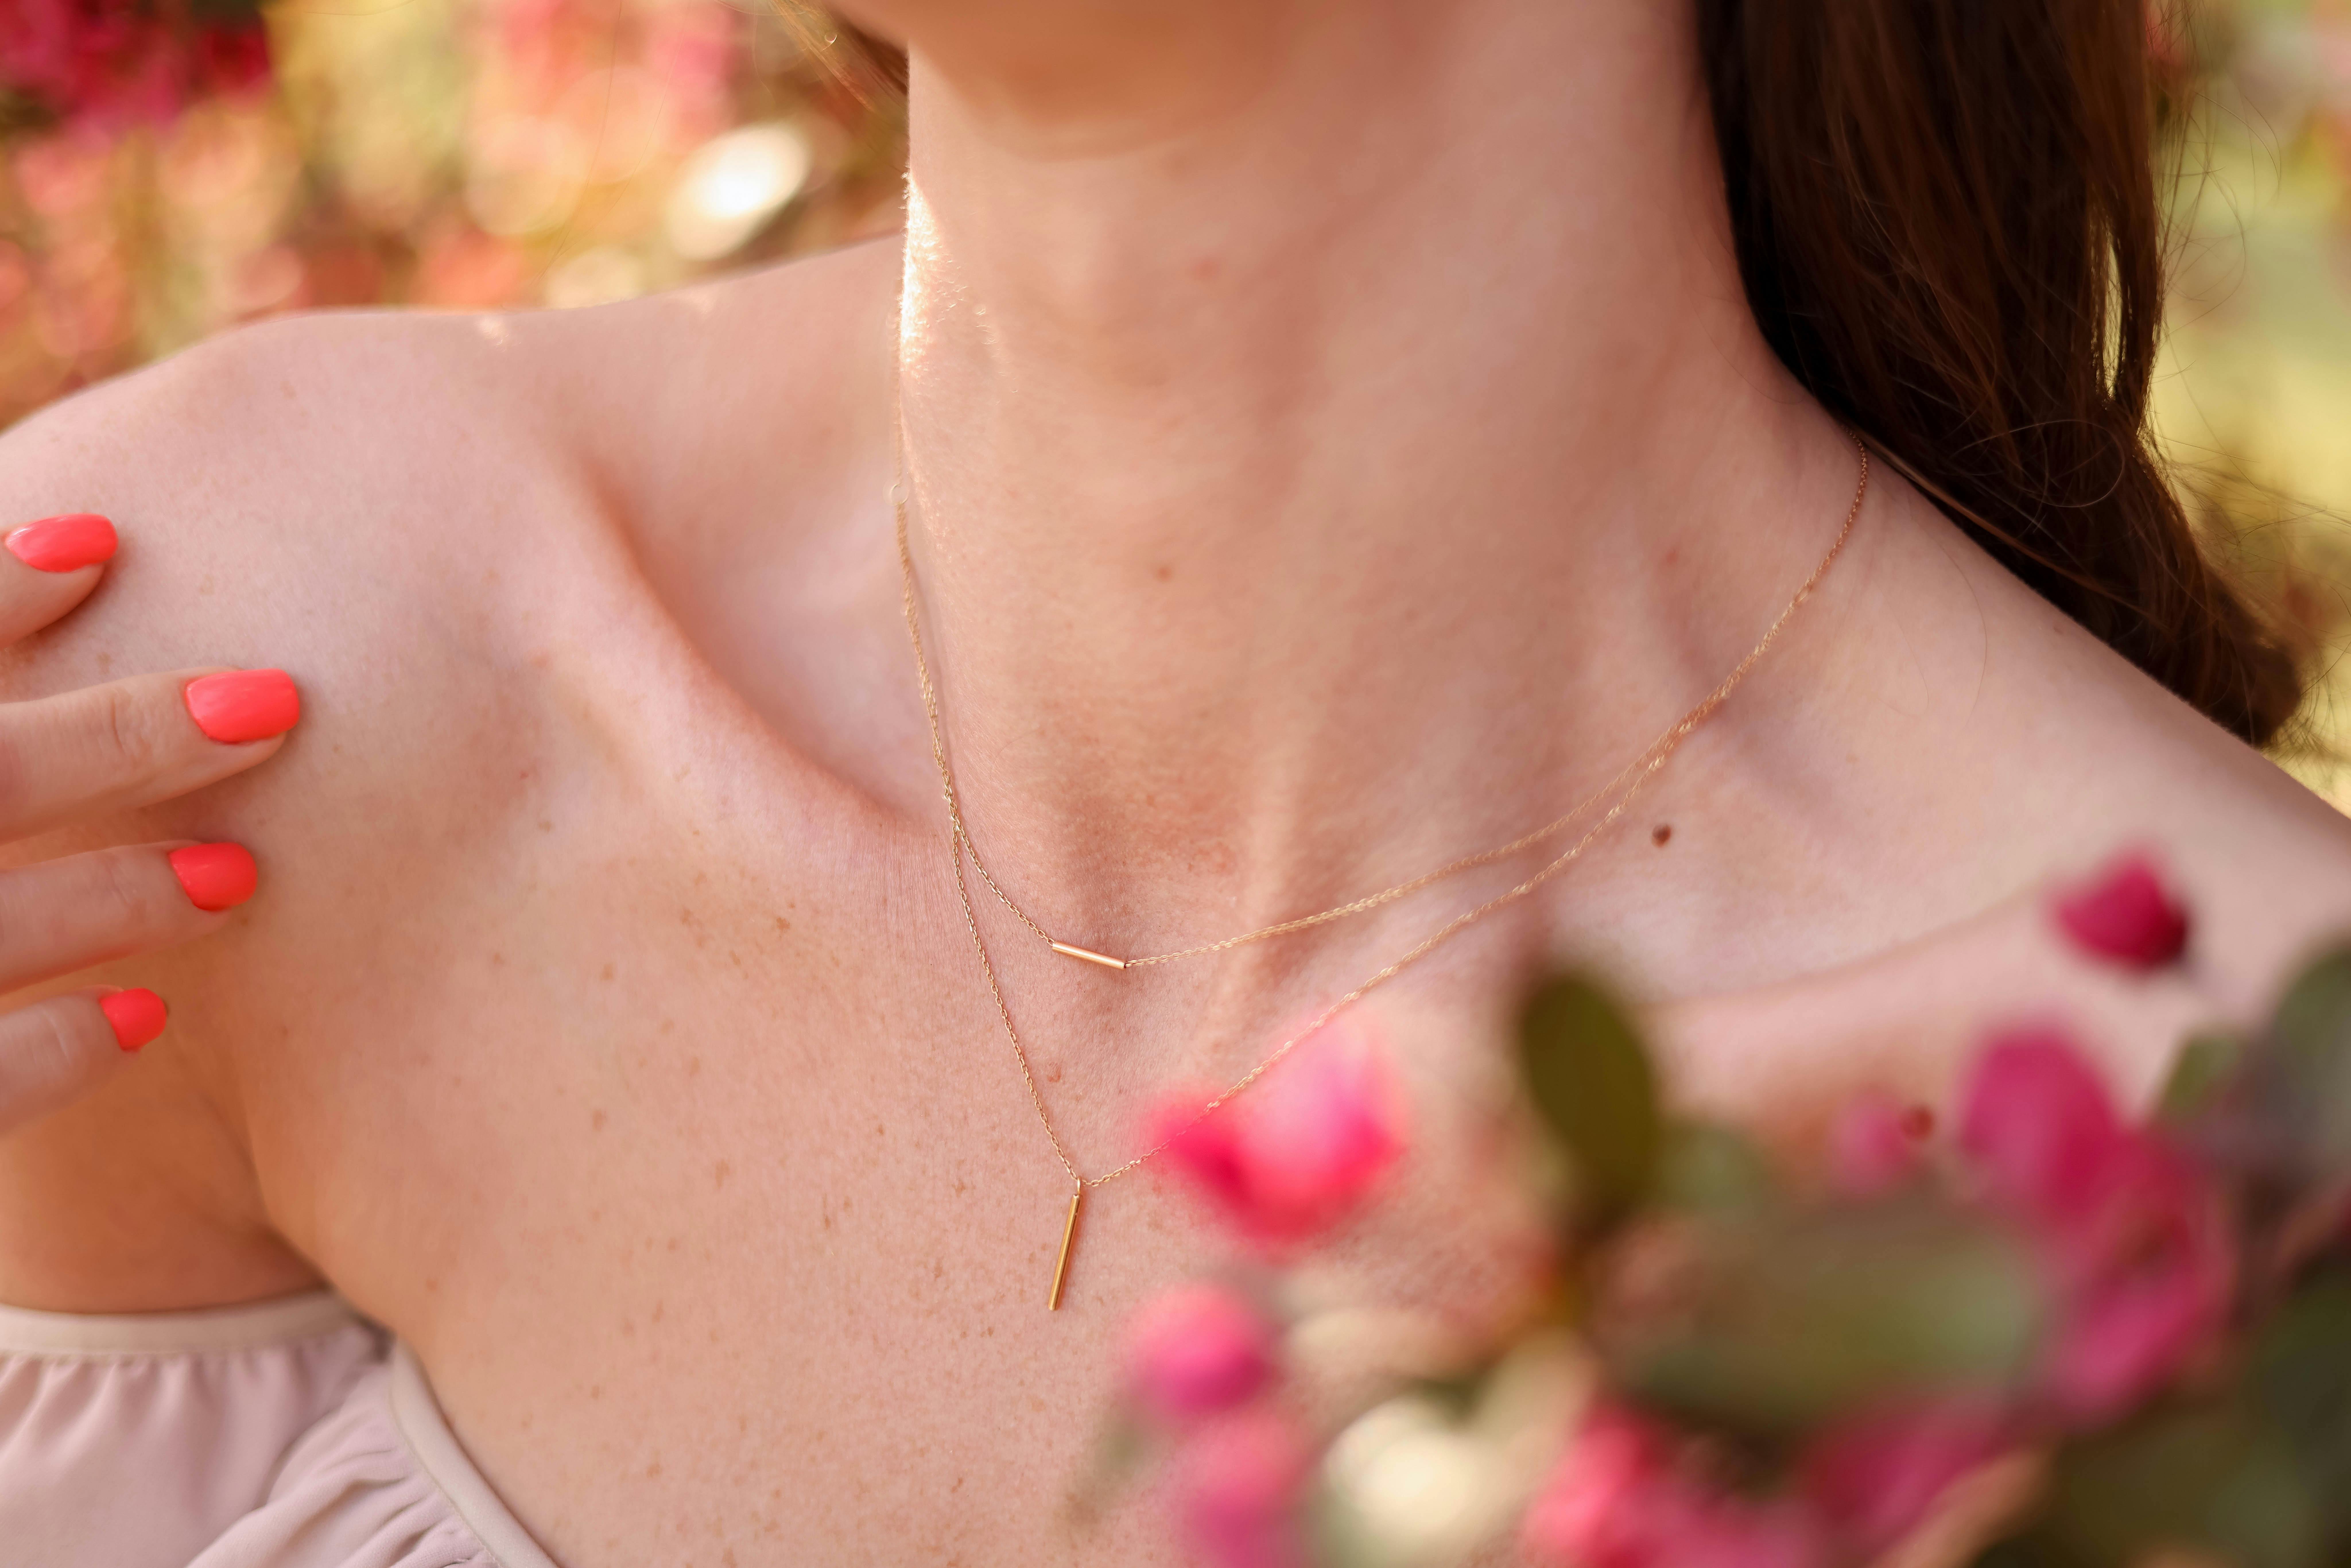 https://images.pexels.com/photos/17224894/pexels-photo-17224894/free-photo-of-close-up-of-woman-wearing-a-delicate-necklace-and-an-off-shoulder-top.jpeg